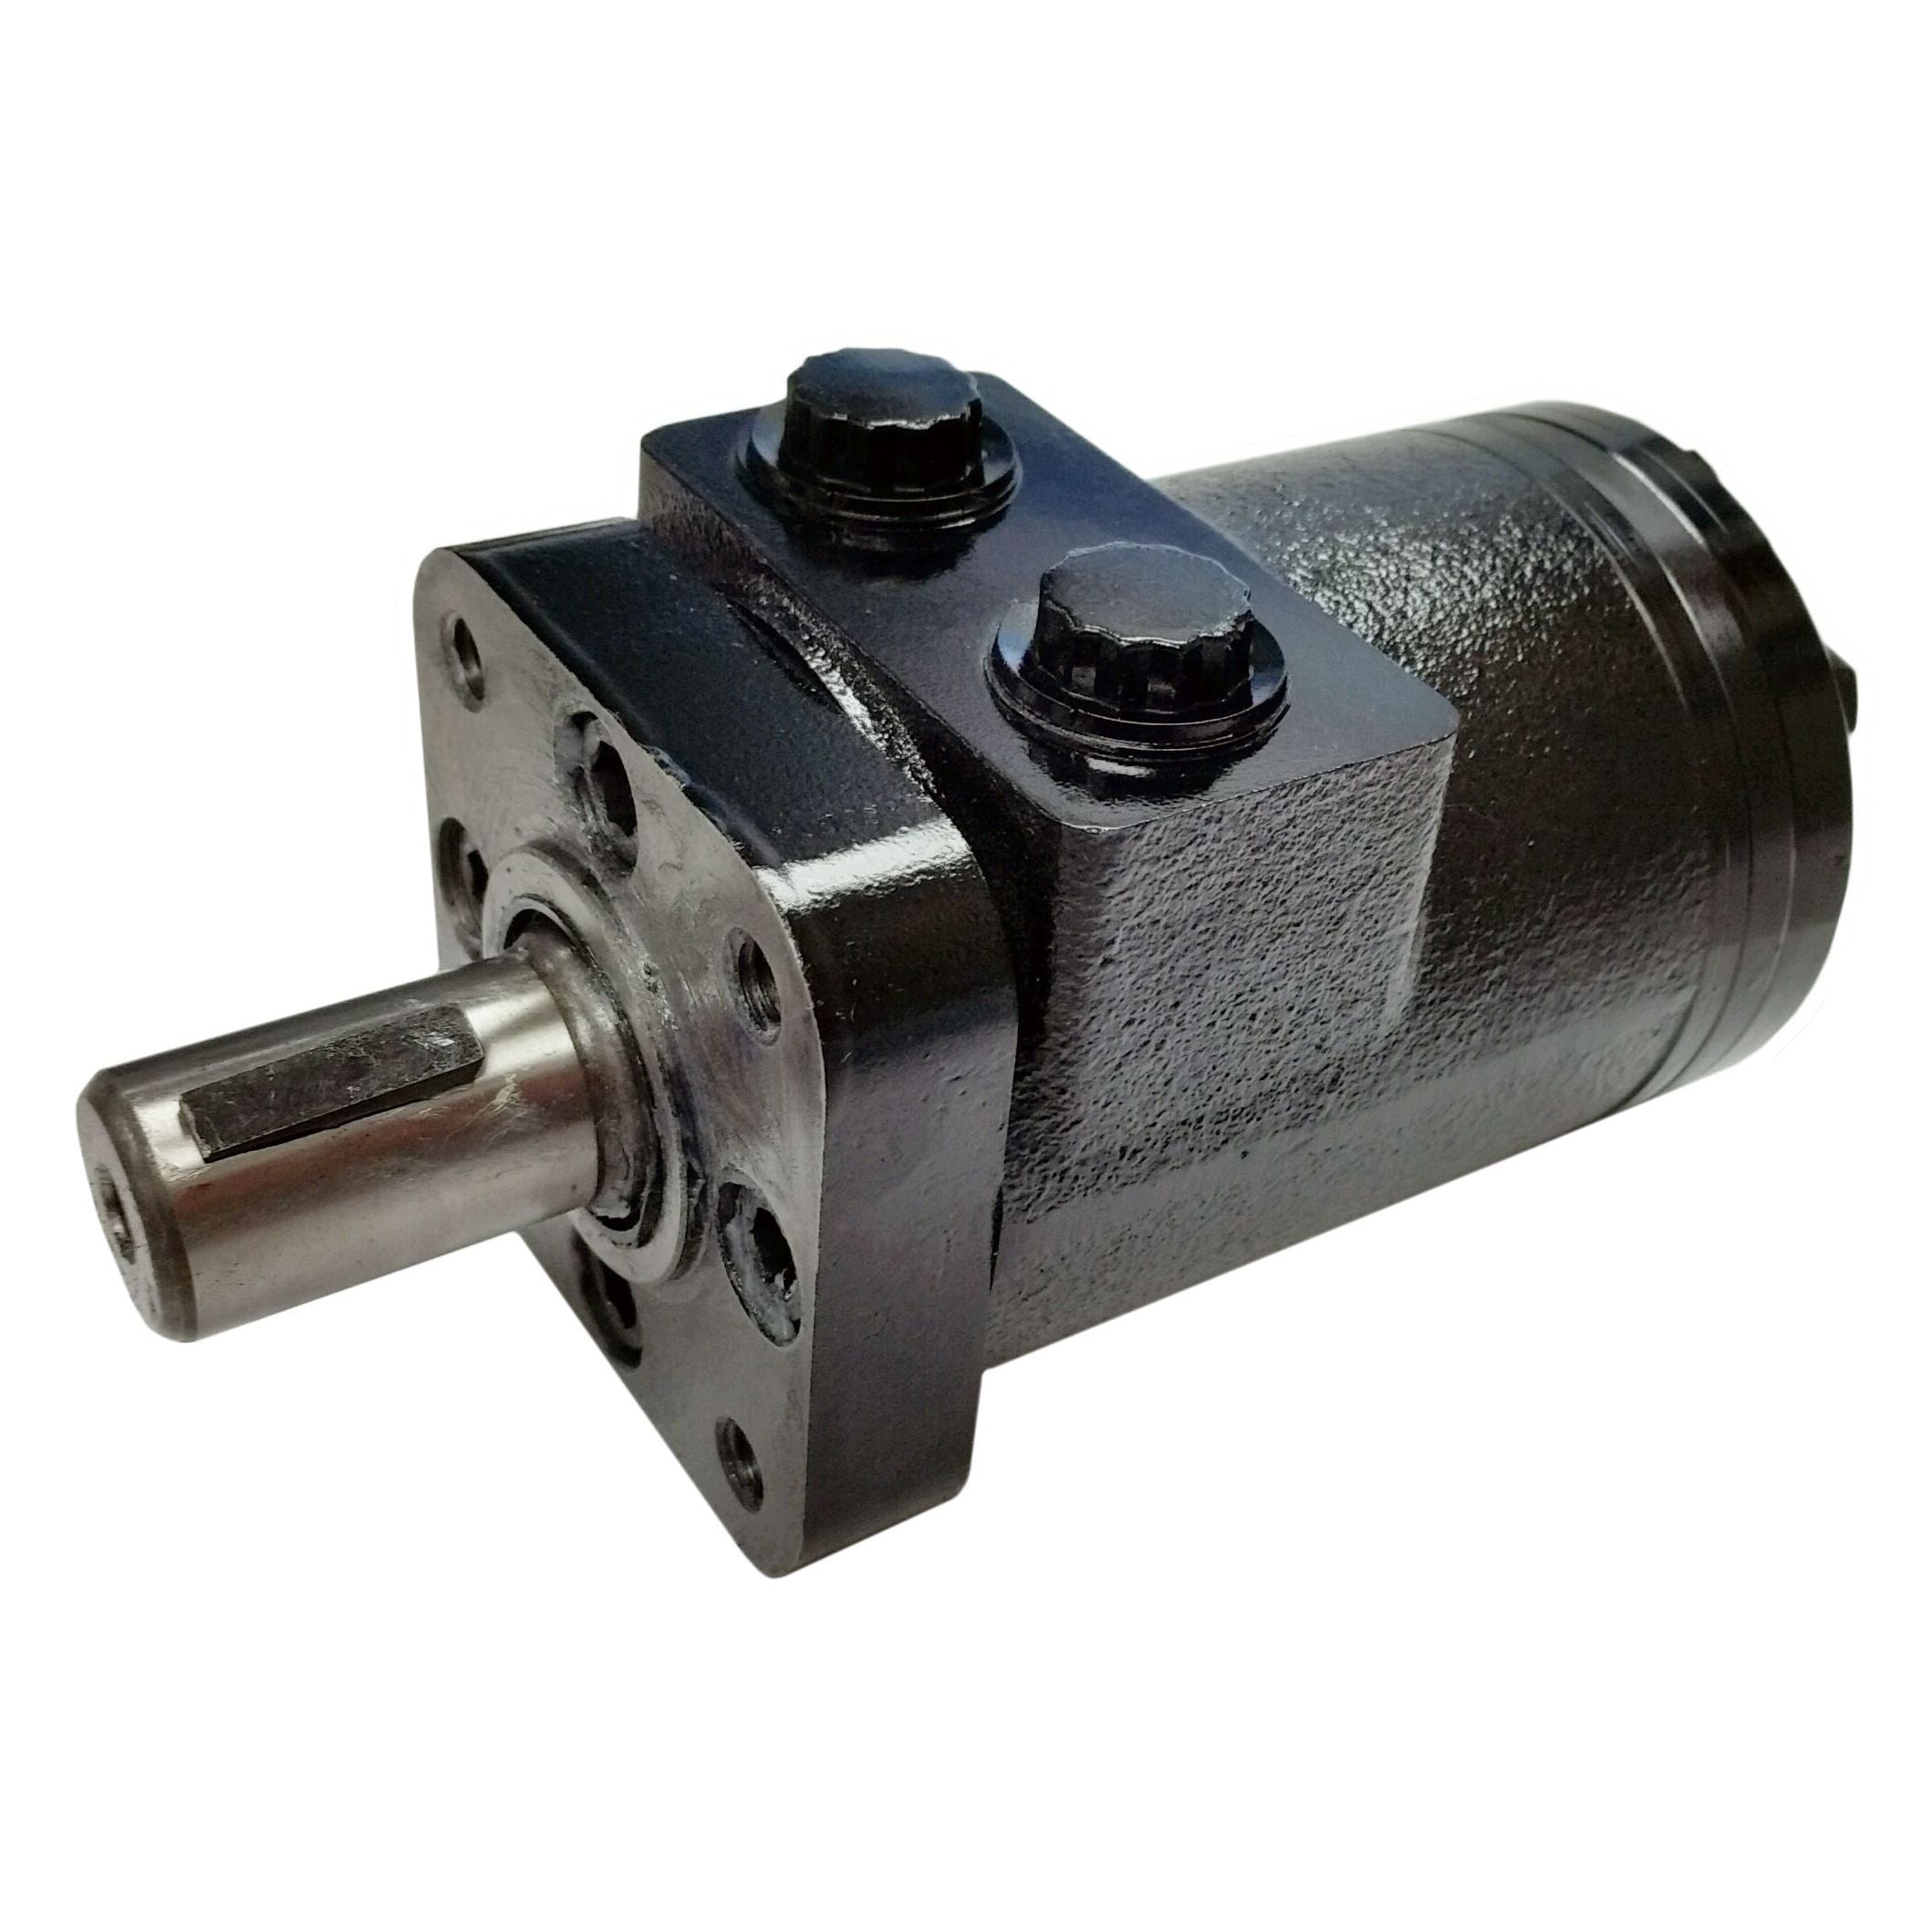 BMPH-400-H4-K-P : Dynamic LSHT Motor, 390cc, 155RPM, 3186in-lb, 1450psi Differential, 15.85GPM, SAE A 4-Bolt Mount, 1" Bore x 1/4" Key Shaft, Side Ported, 1/2" NPT